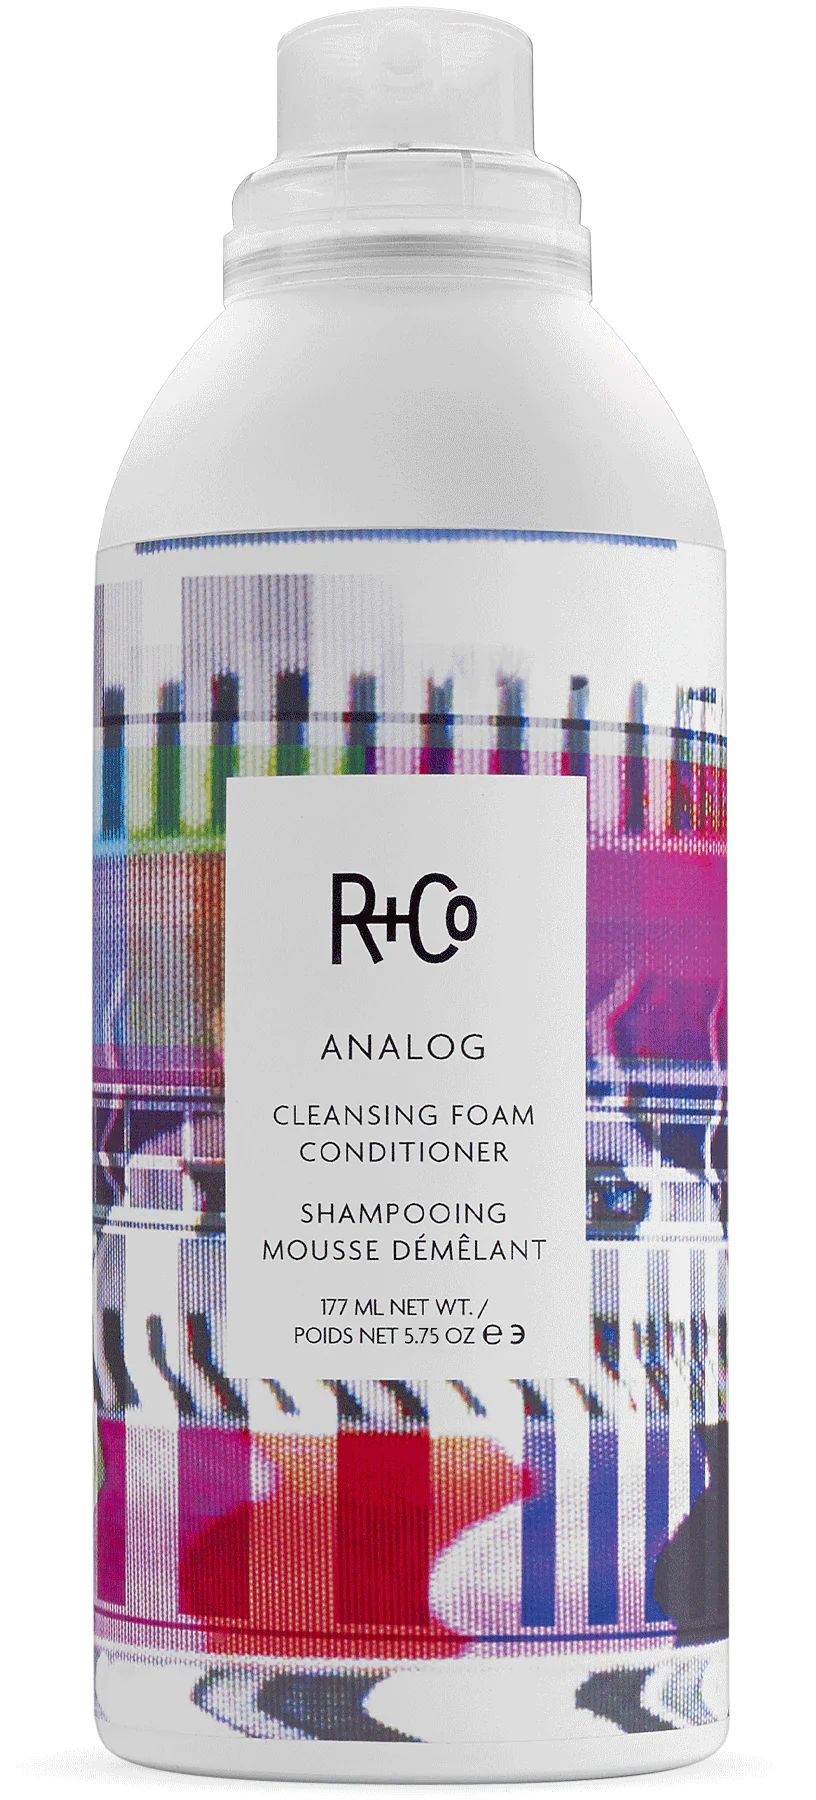 R+Co ANALOG Cleansing Foam Conditioner - 5.75 OZ | R+Co